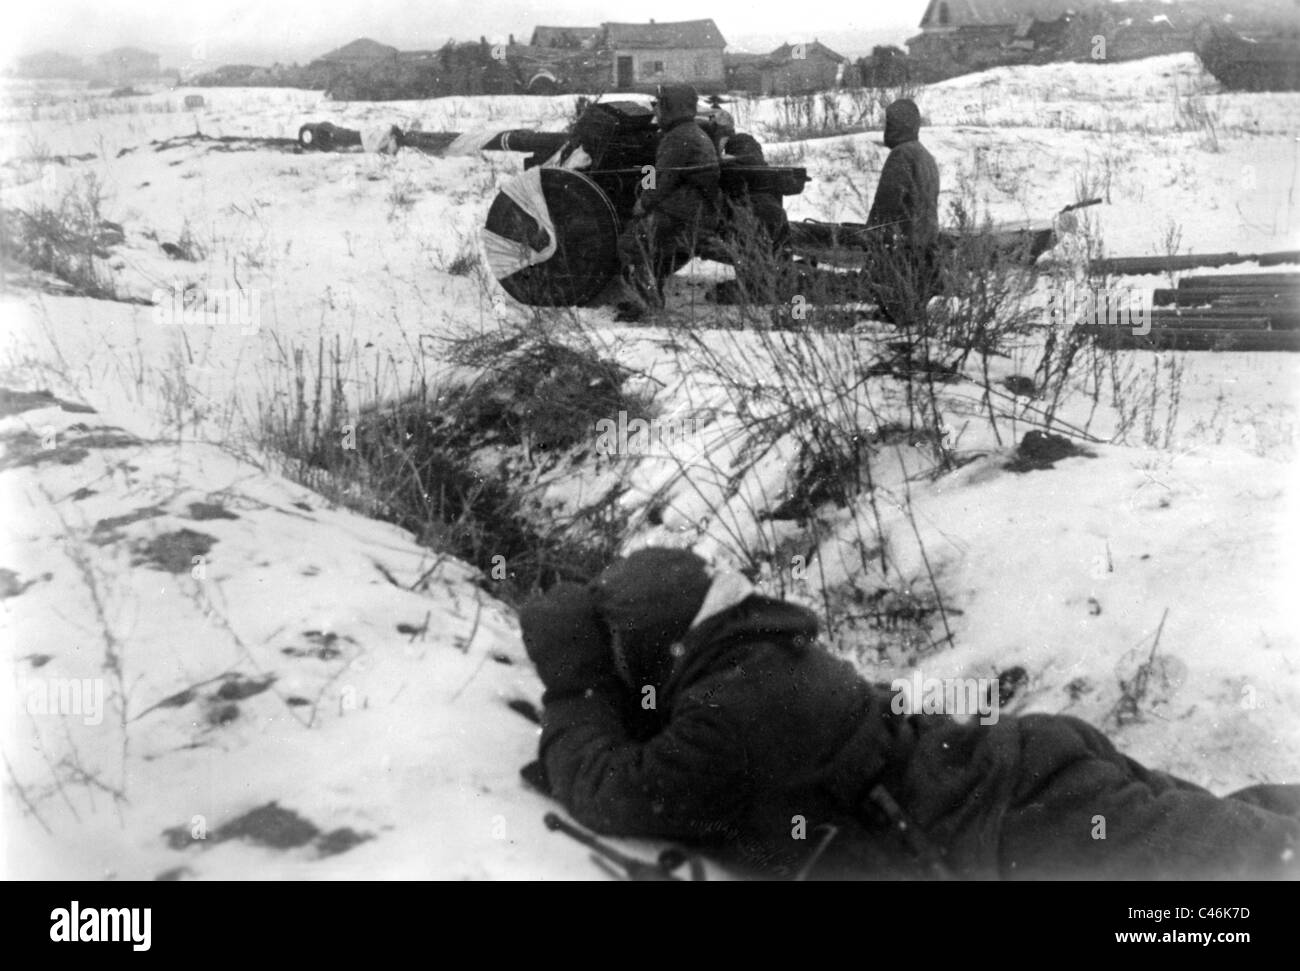 Second World War: German soldiers operating in the Kalmyk steppe ...